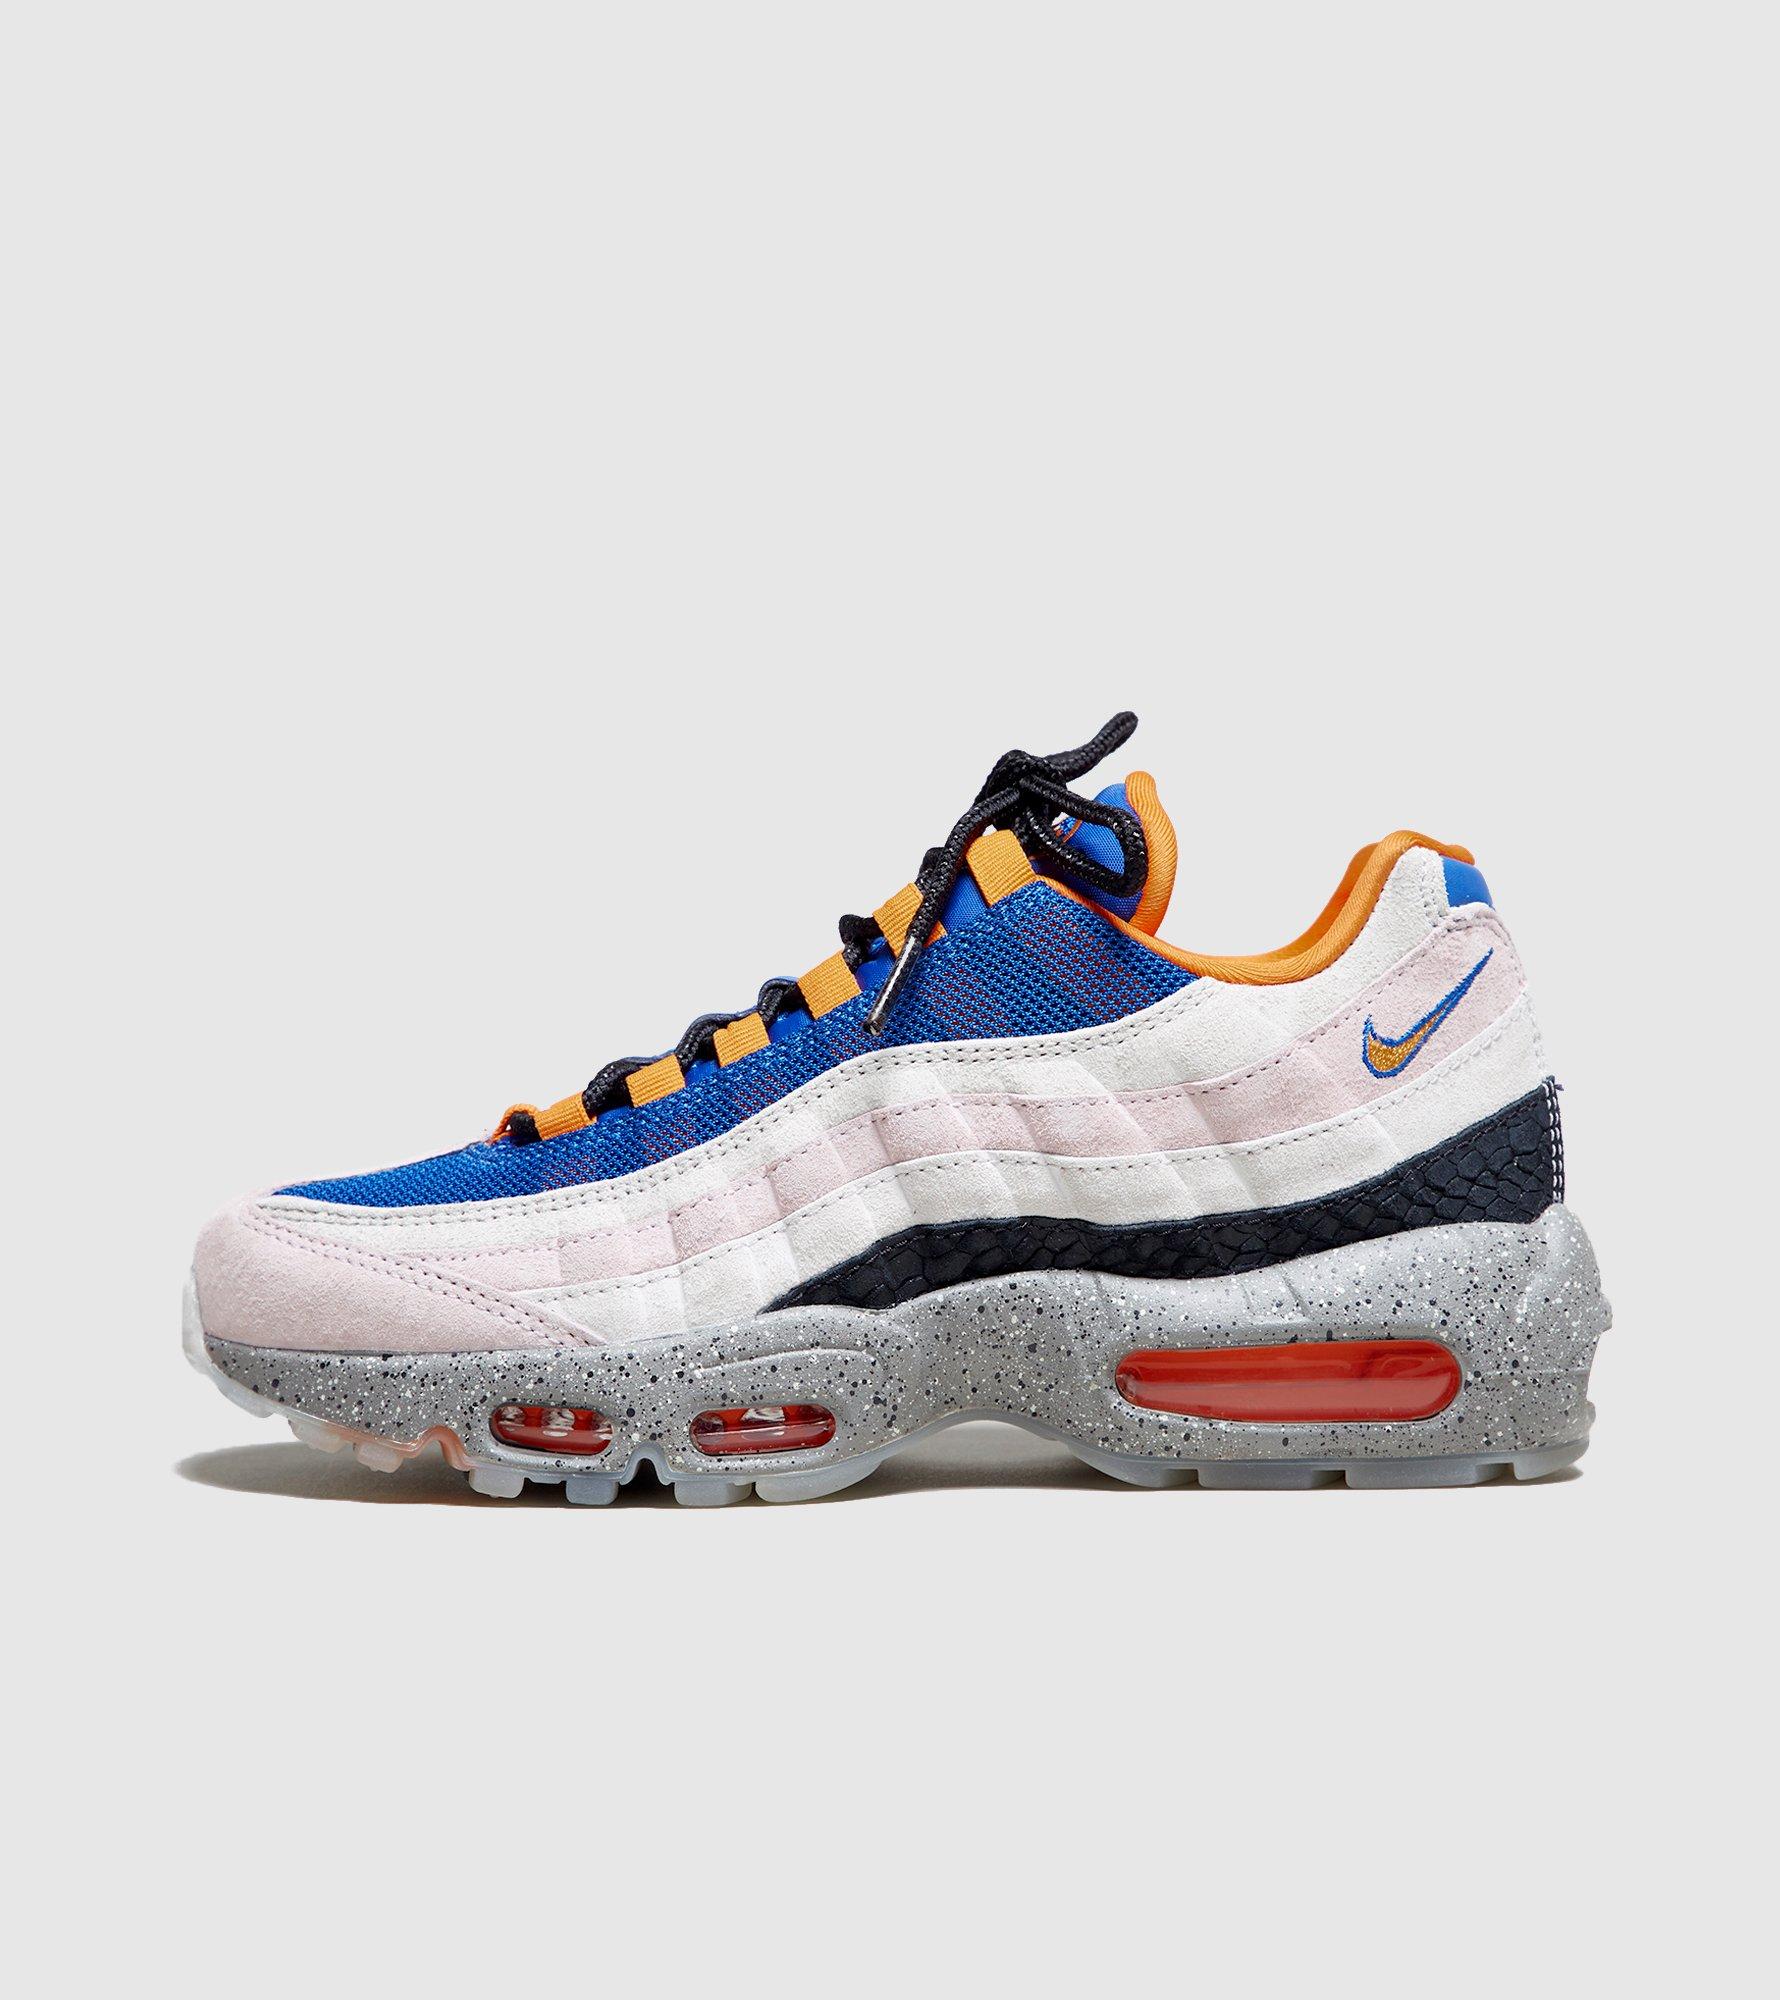 Redada astronauta cáscara size? on Twitter: "The @nikesportswear Air Max 95 Premium is re-imagined in  a colourway based on the "King of the Mountain" Air Max 90 - an ACG  Mowabb-inspired fan favourite. Available online - #